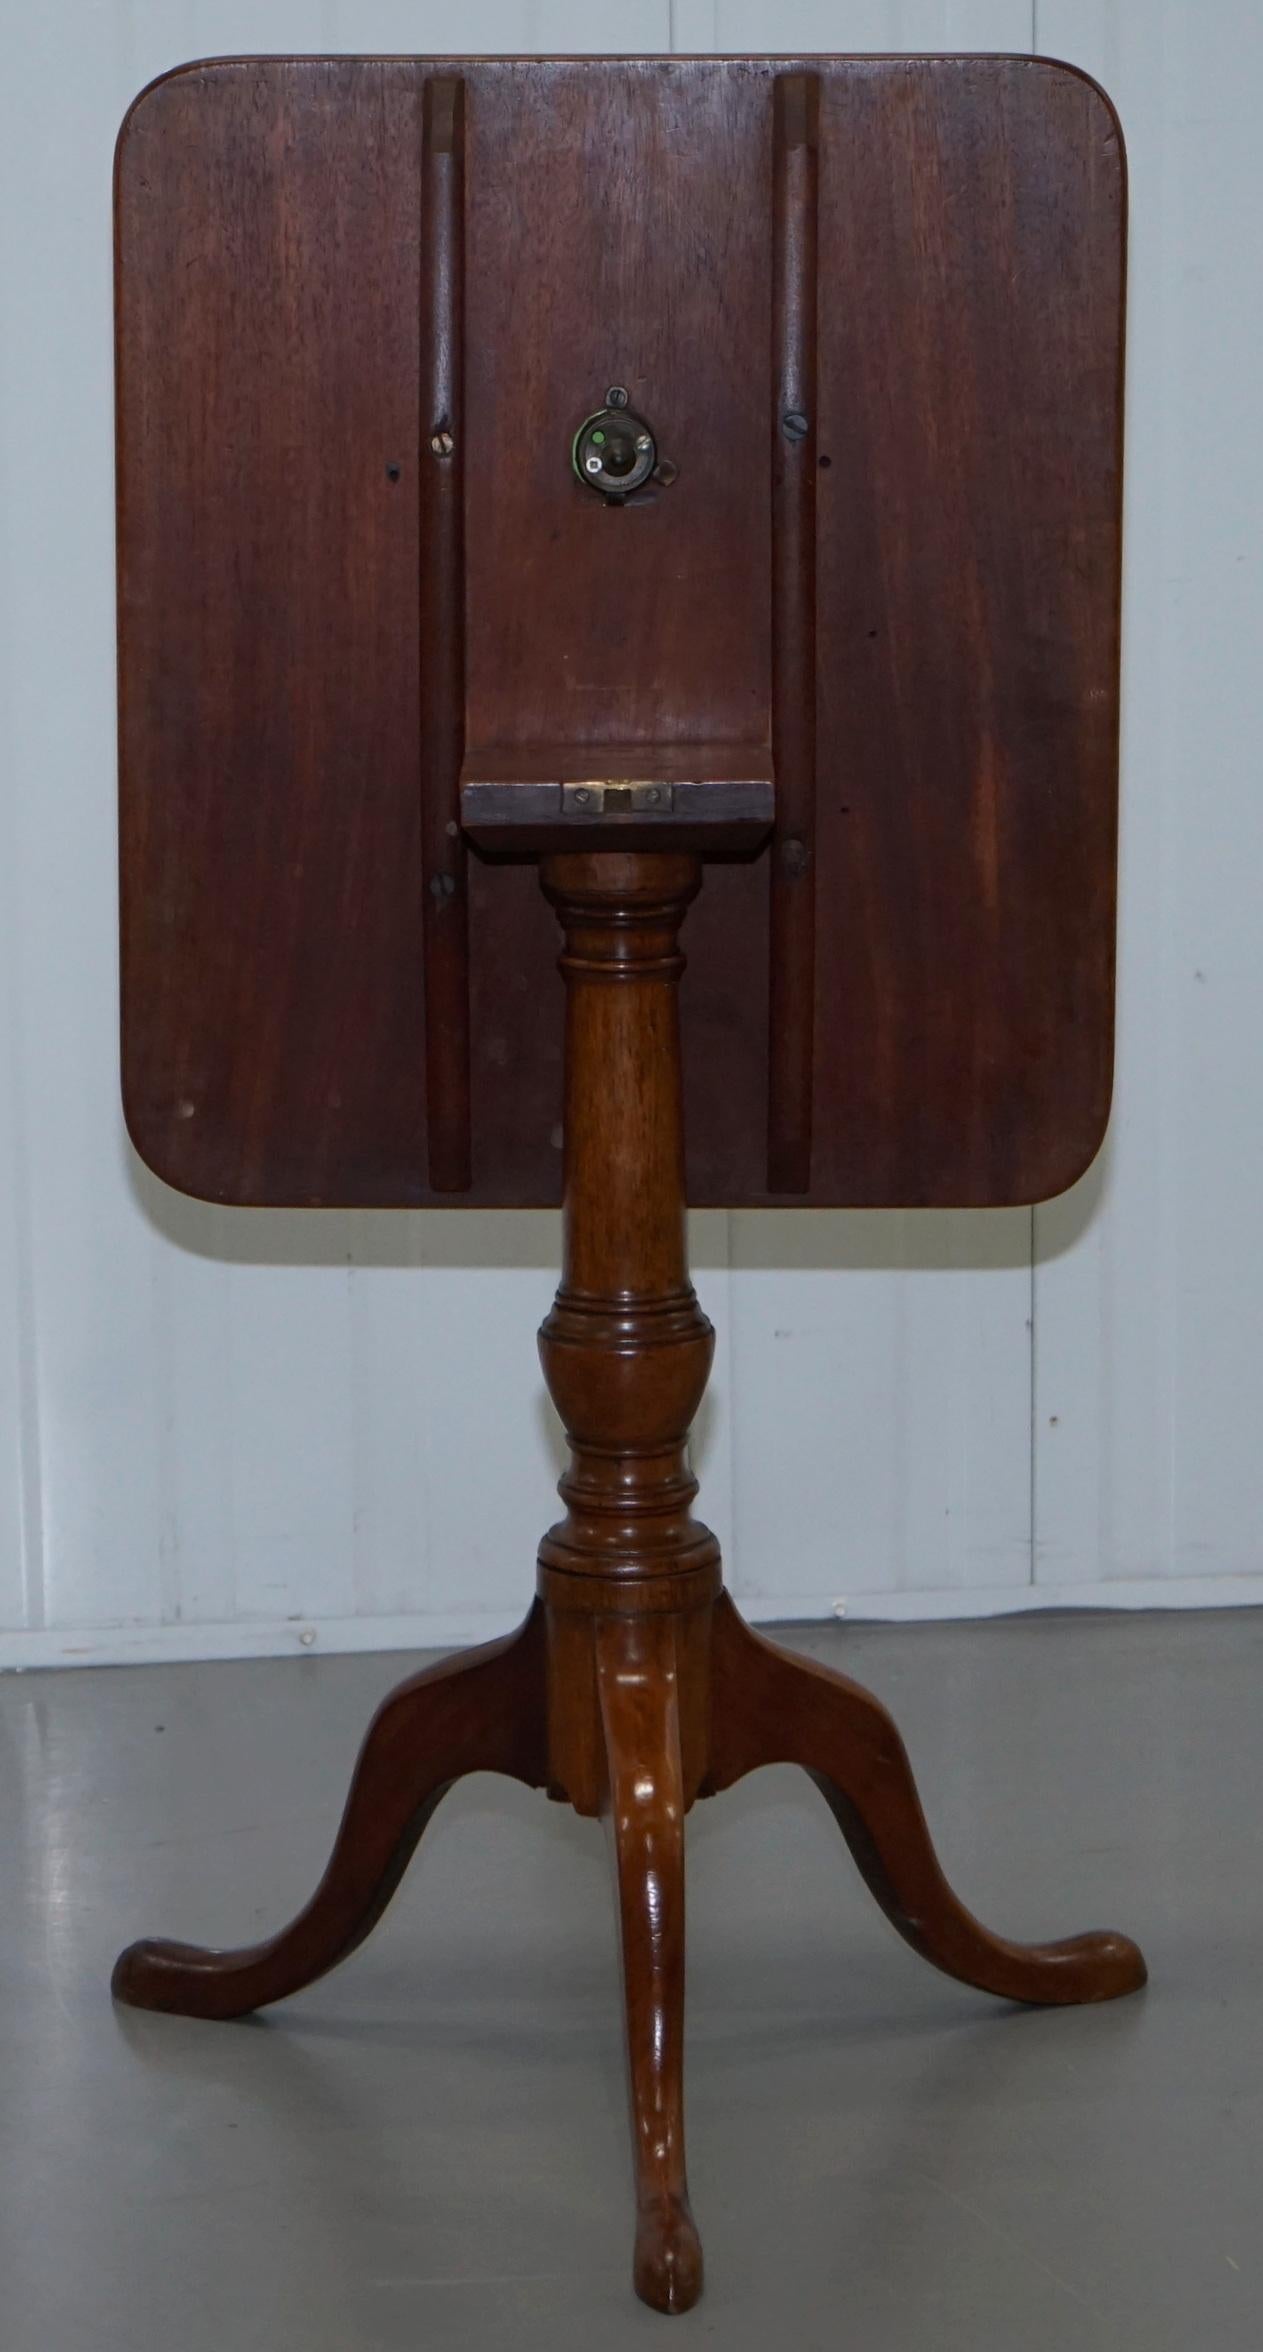 Mid-19th Century Victorian Tripod Side End Lamp Table in Walnut with Tilt Top Function circa 1860